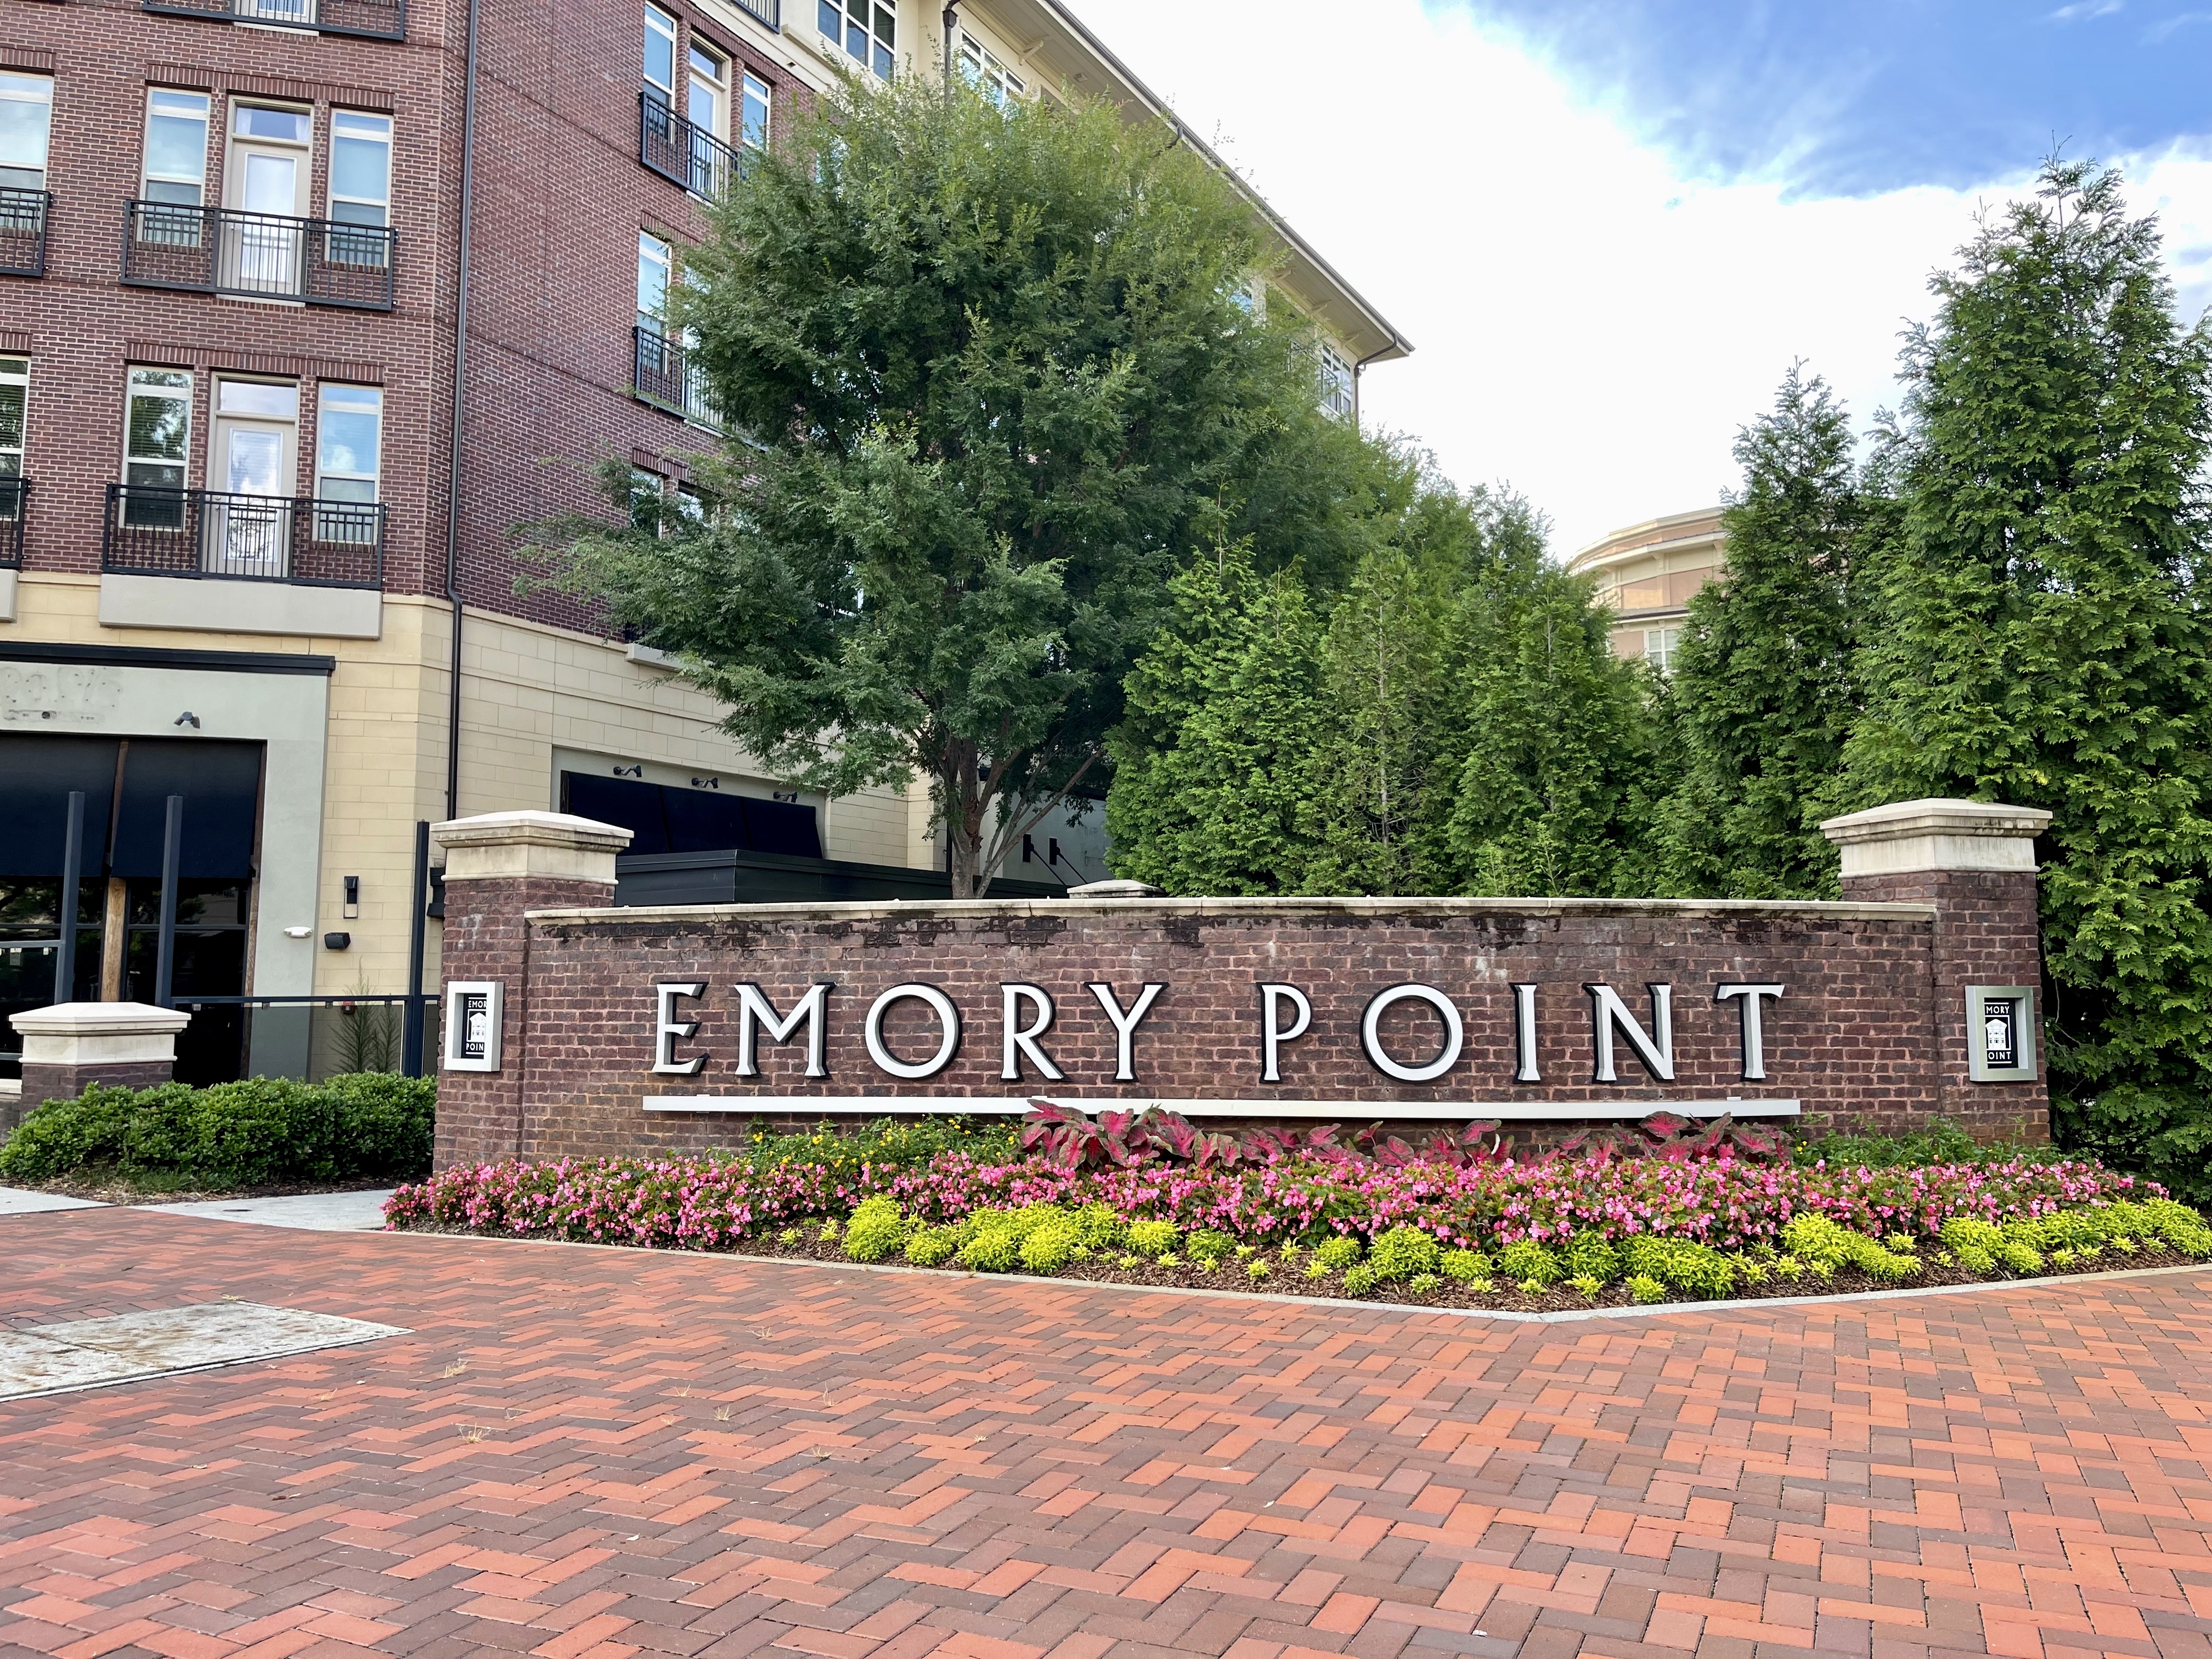 Emory Point Apartments in Druid Hills